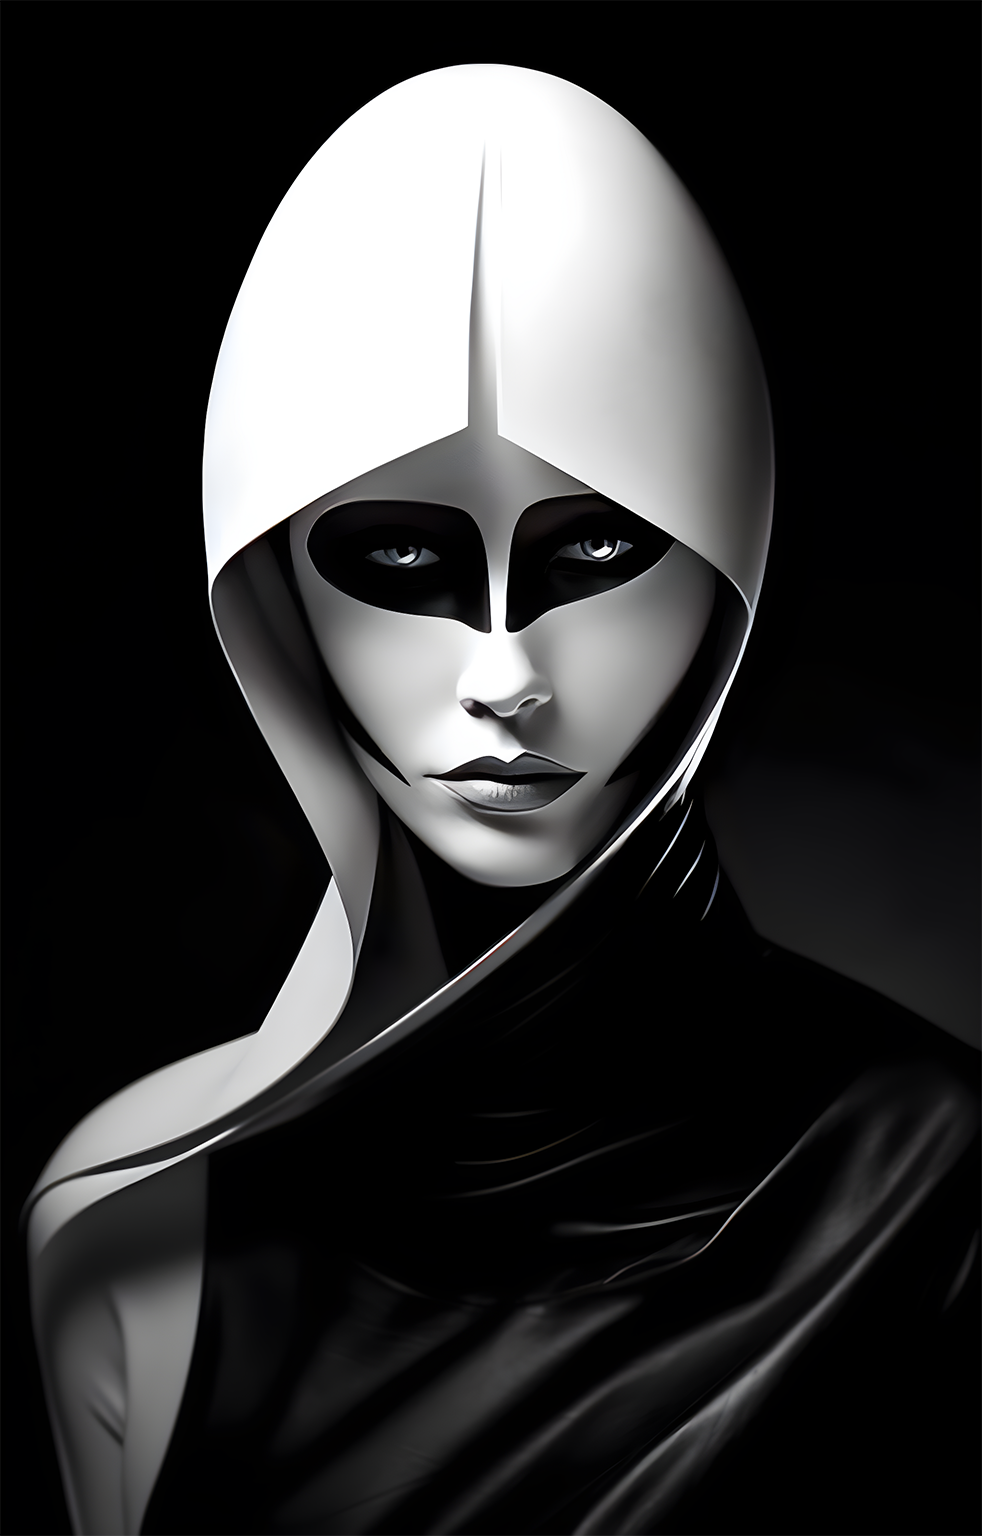 A stunning fusion of futuristic glamour and monochrome aesthetics  painted in bold black and white.